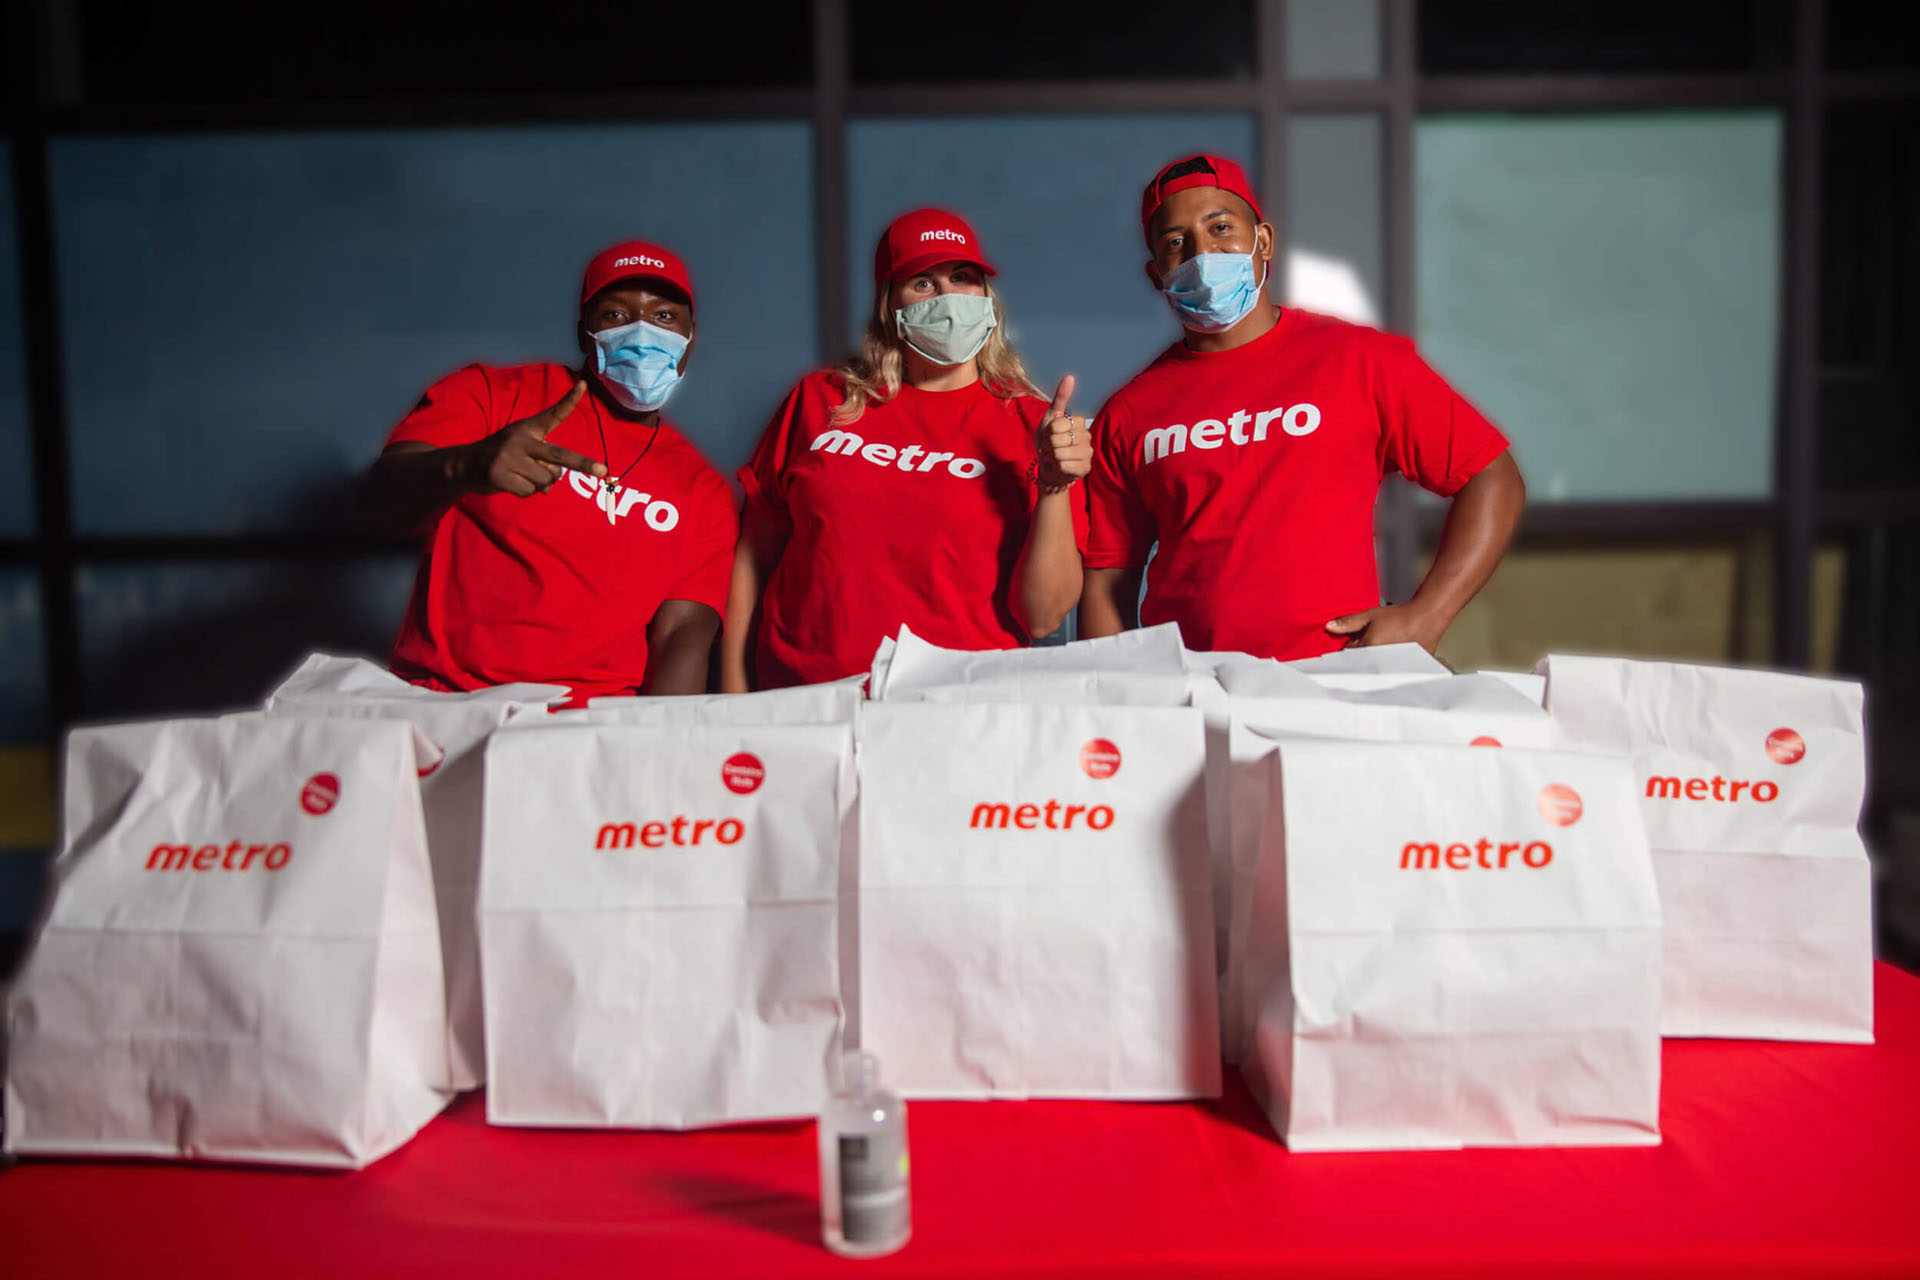 Metro Brand Ambassadors standing behind a red table with white metro paper bags